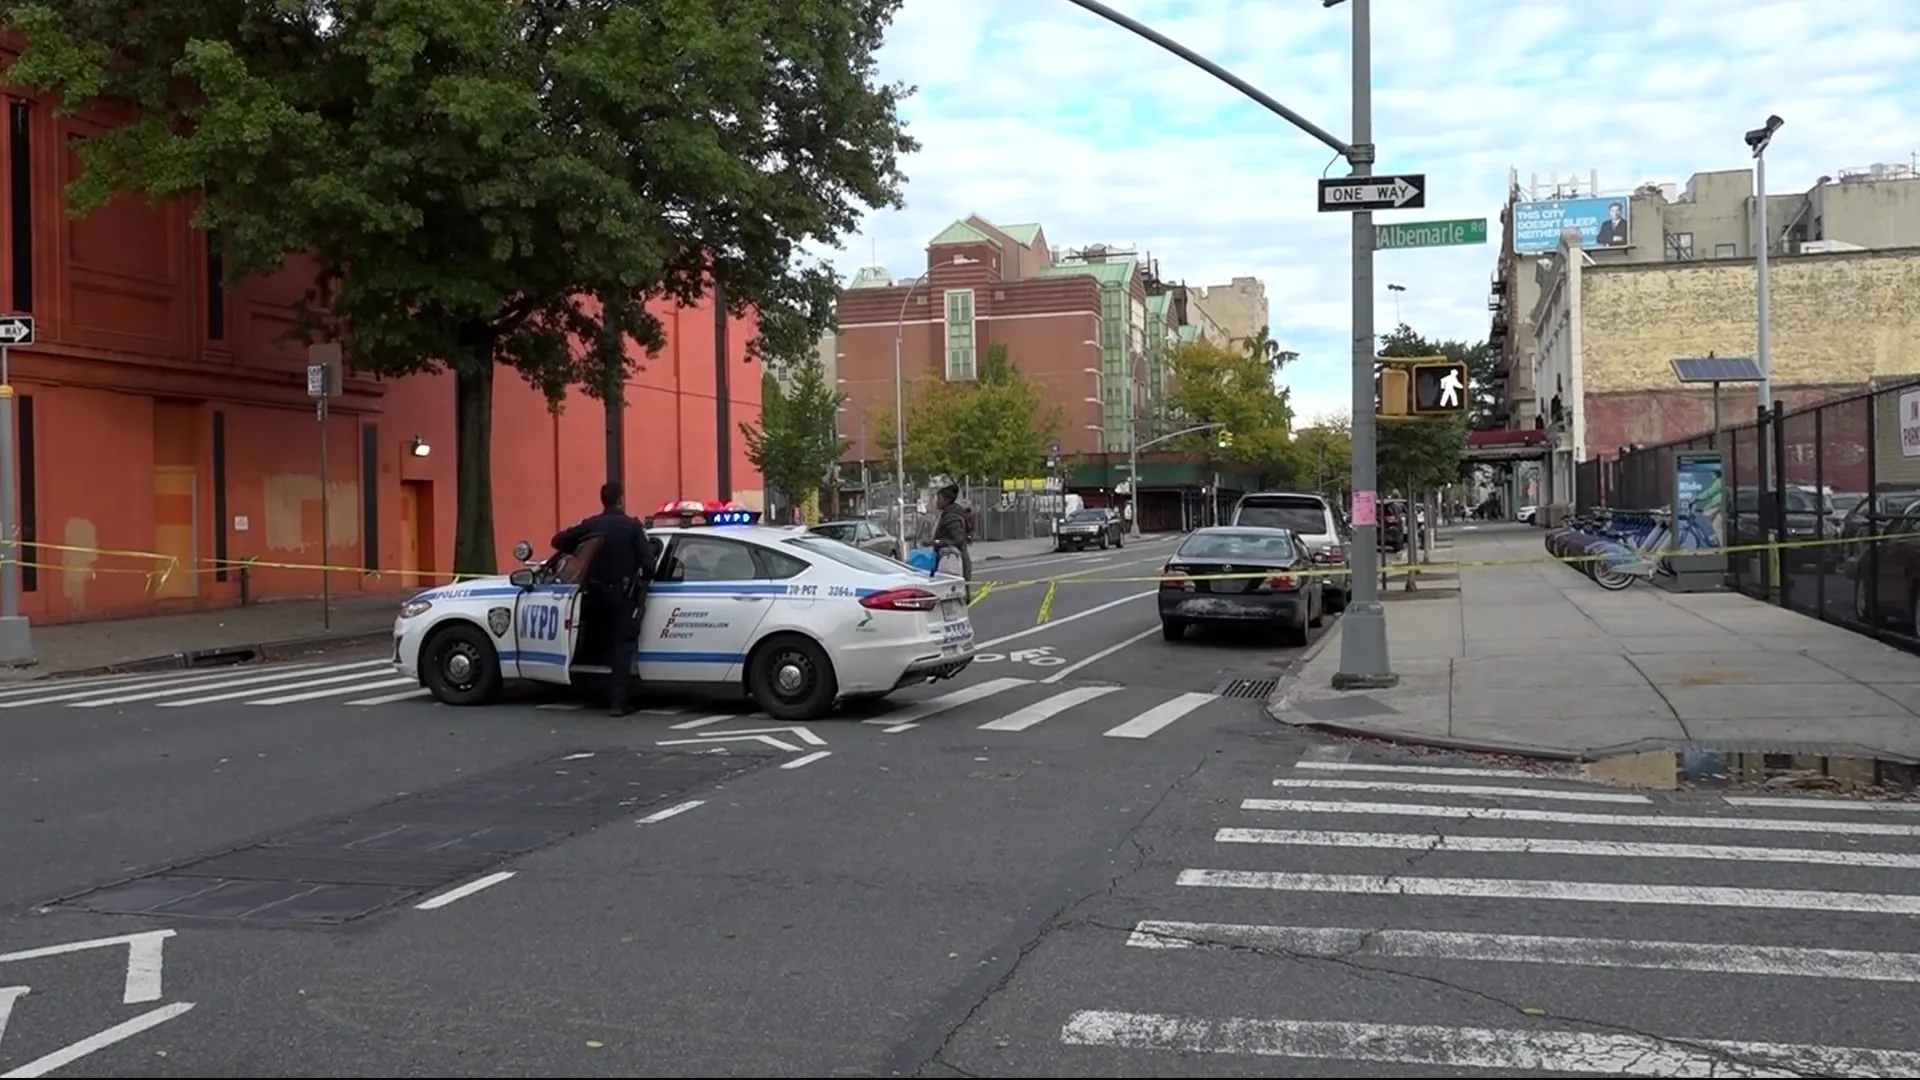 Car stop in Brooklyn drags police sergeant, says NYPD.